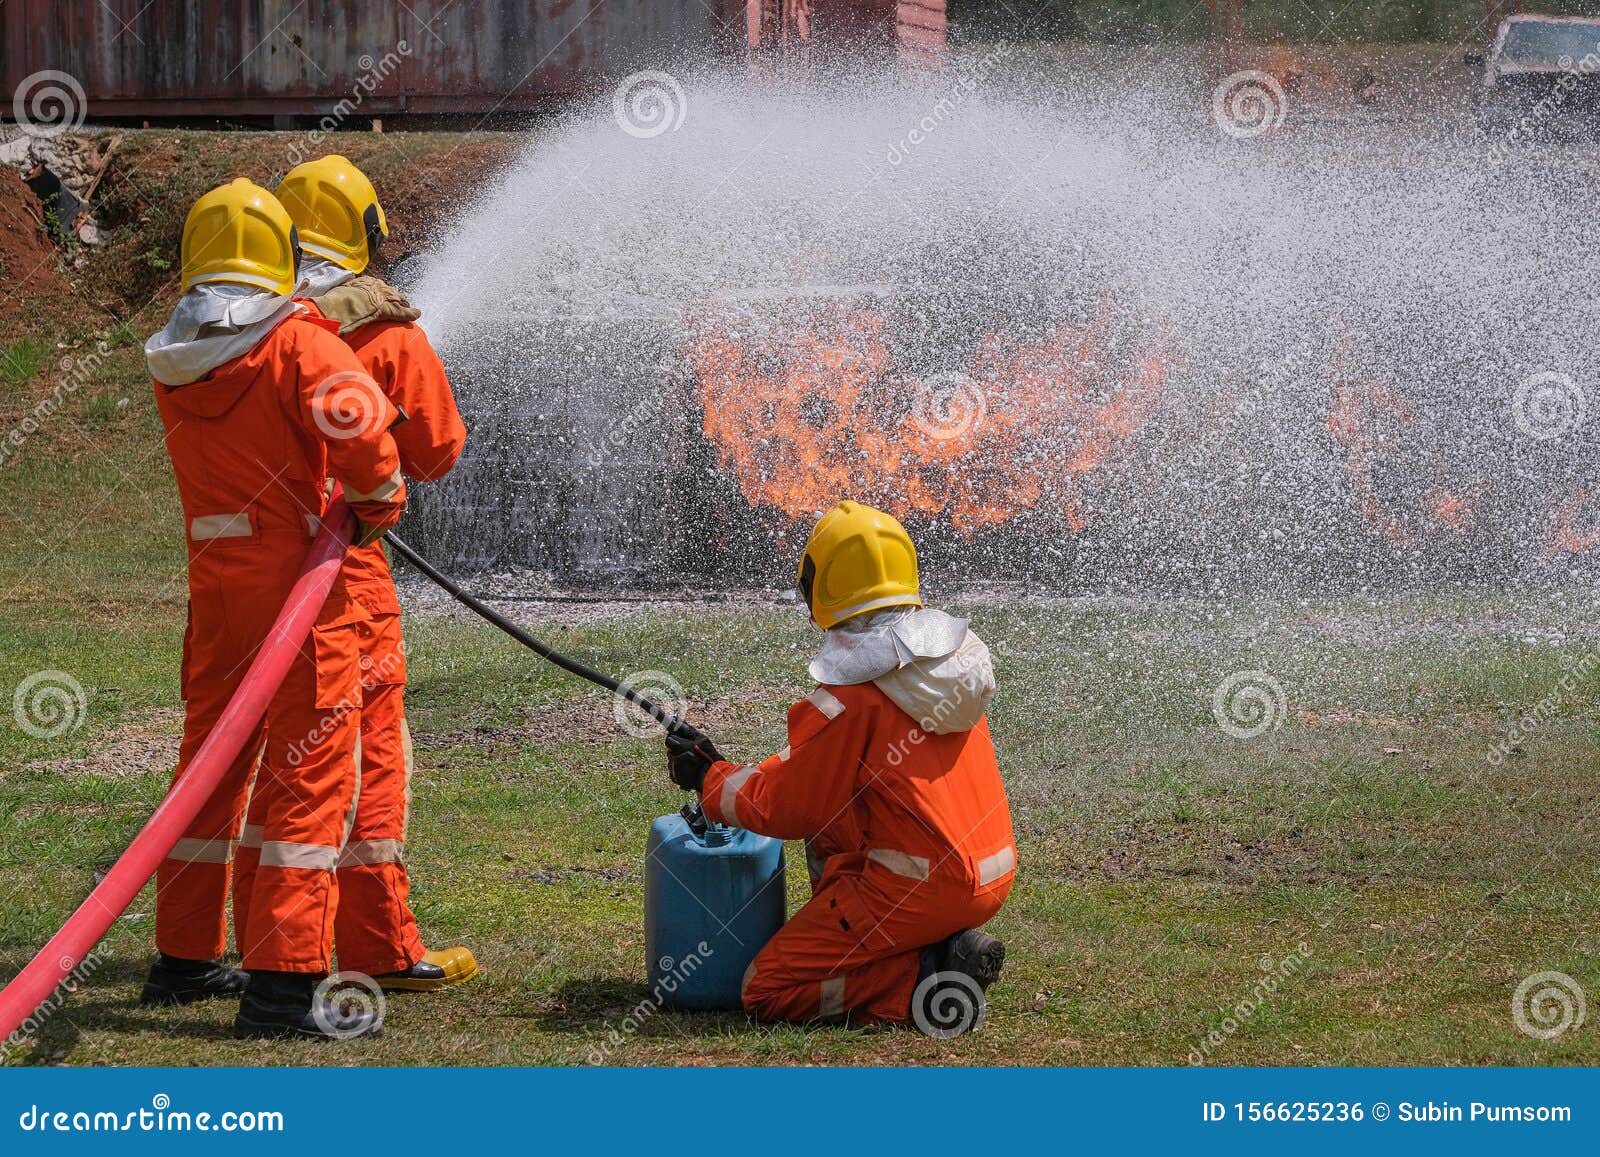 Firefighters Extinguish The Fire With A Chemical Foam Coming From The 